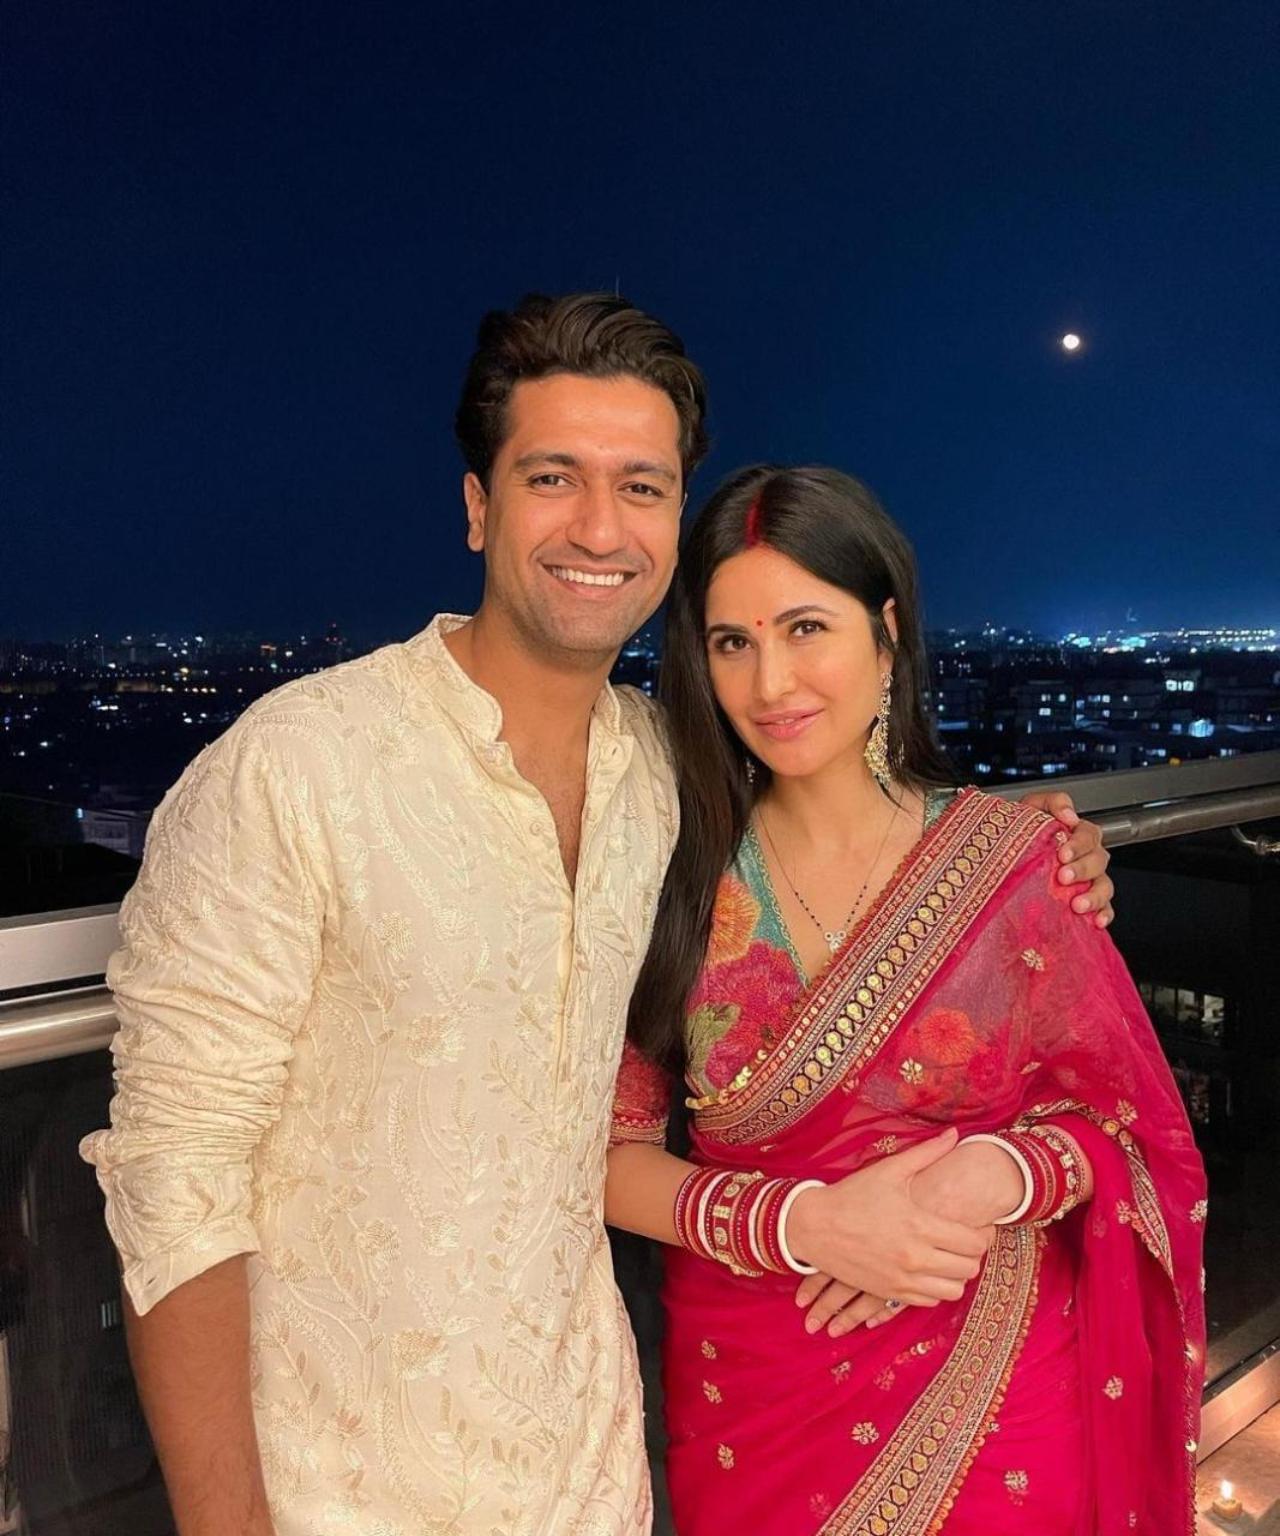 Vicky Kaushal & Katrina KaifThis was probably one of the most talked about weddings in B-Town this year. The two artists had a big fat Indian wedding stretching over a long period. Vicky and Katrina's pictures from their wedding definitely serve as couple goals. Katrina, after sharing gorgeous pictures of her celebrating her first Karva Chaut, is all set to have a diwali bash with her hubby Vicky Kaushal